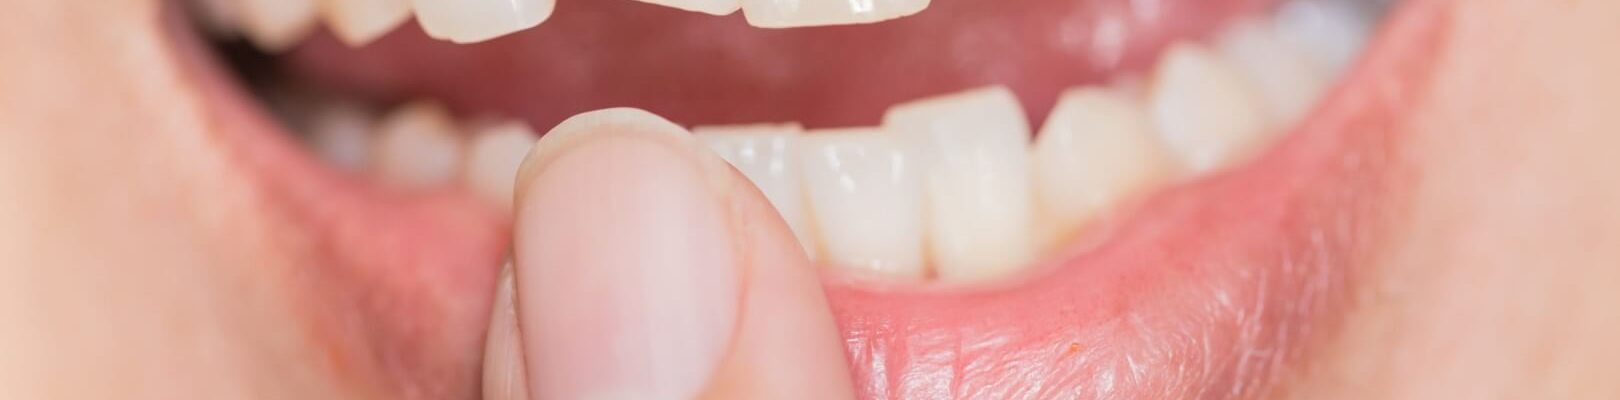 how-to-fix-a-cracked-tooth-scaled-minified